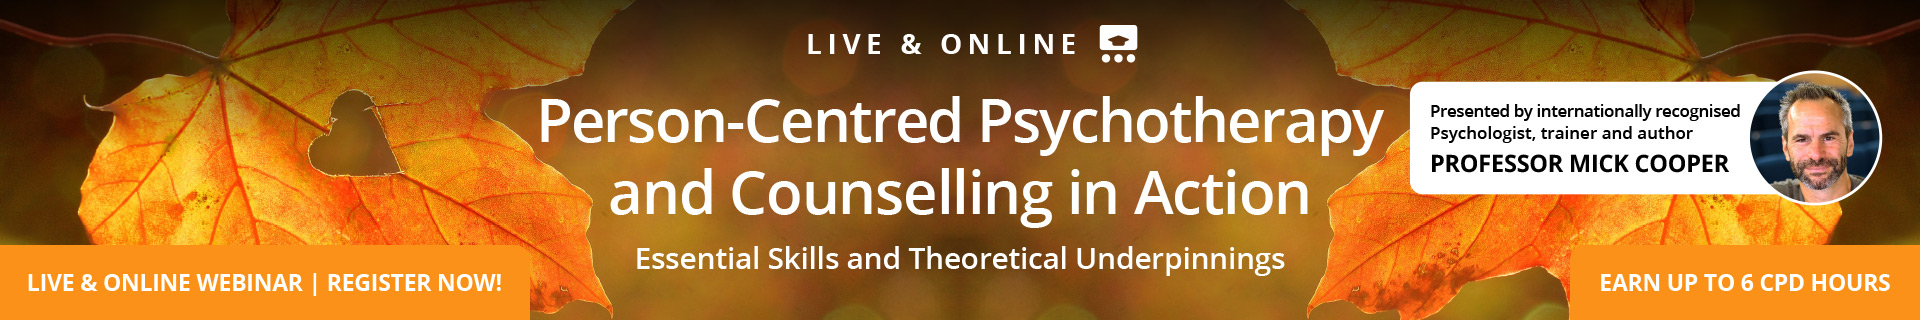 Person-Centred Psychotherapy and Counselling in Action: Essential Skills and Theoretical Underpinnings